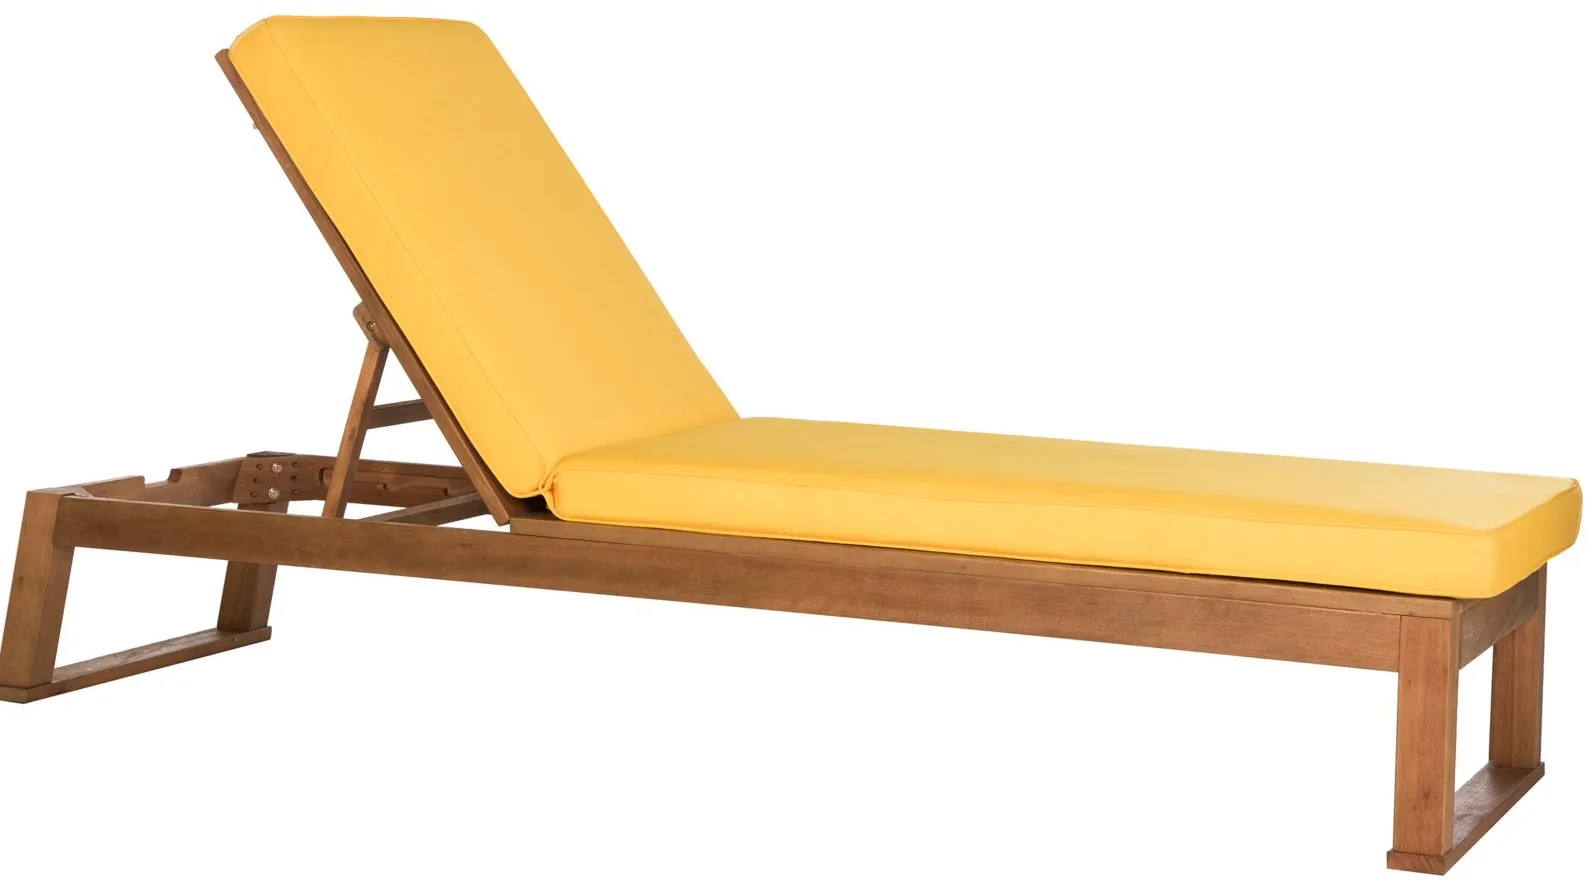 Sebesi Sunlounger in Natural / White by Safavieh